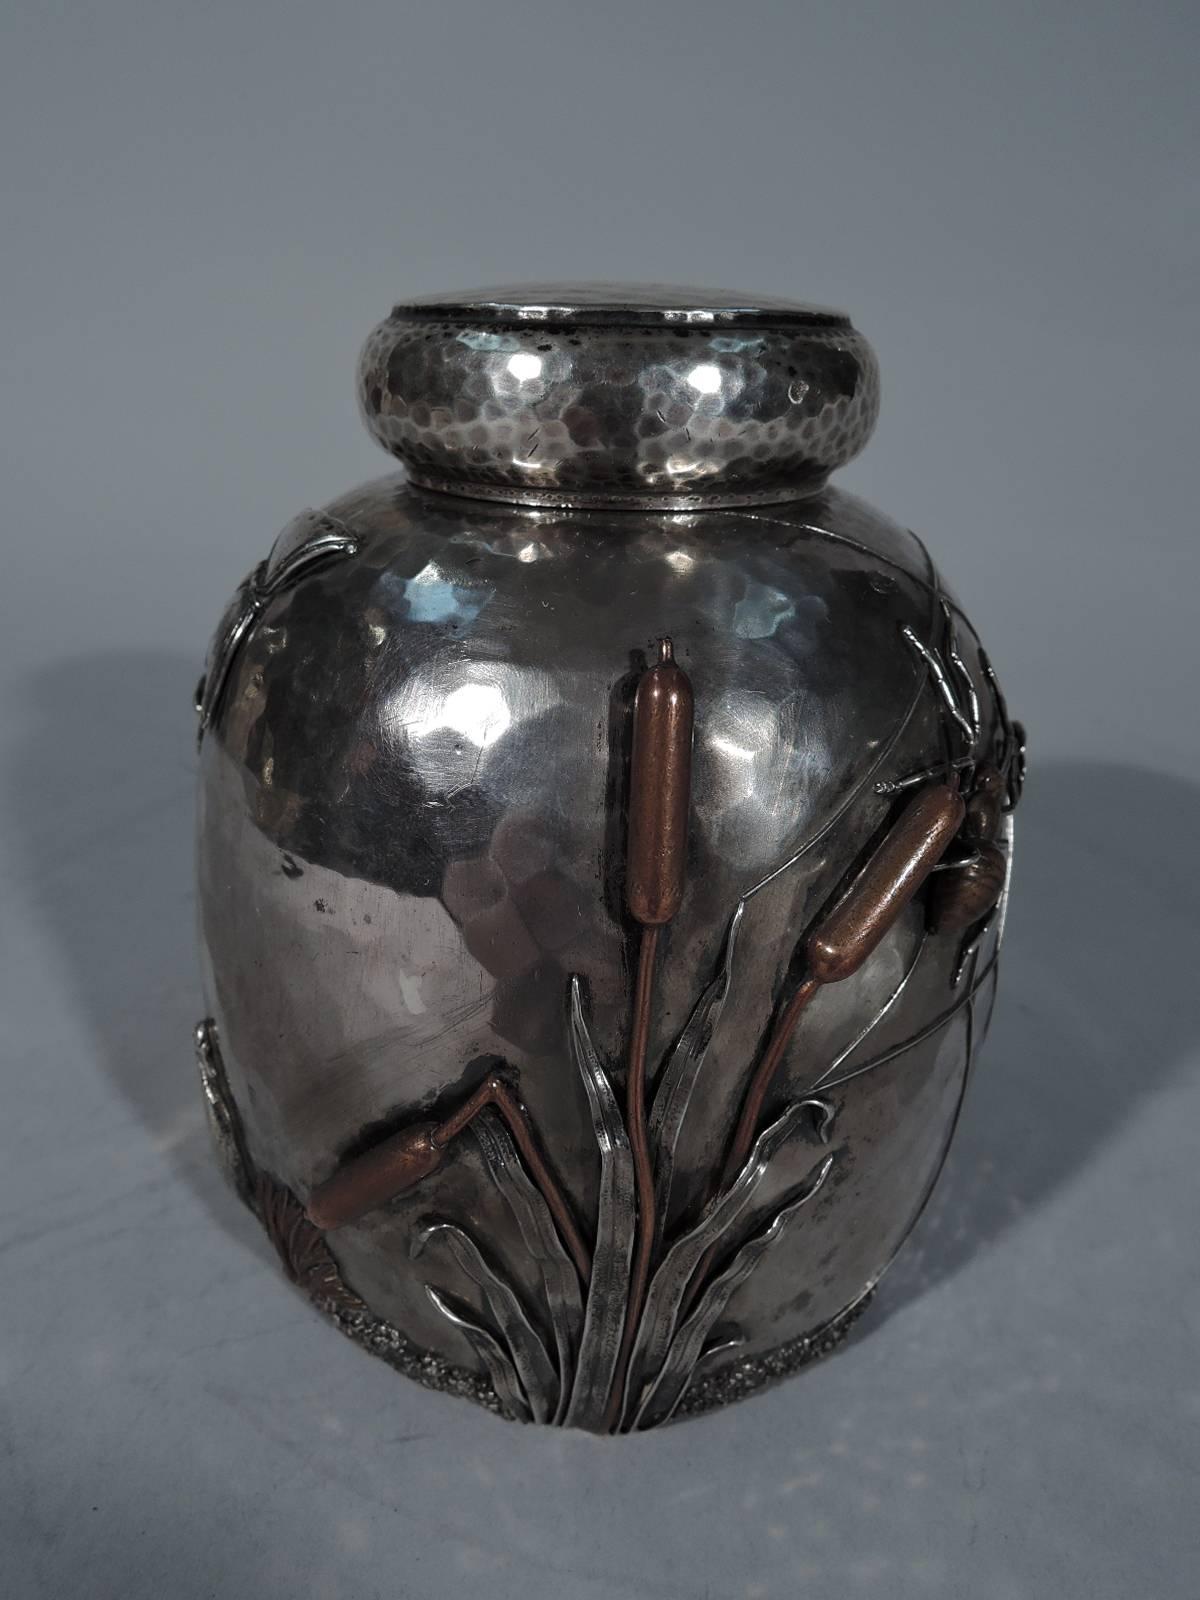 Fabulous Japonesque sterling silver and mixed metal tea caddy. Made by Gorham in Providence in 1884. Dome body with short neck. Flat cover with curved sides. Mixed metal bird (crane), insects (spider and butterfly), and plants (cattails and